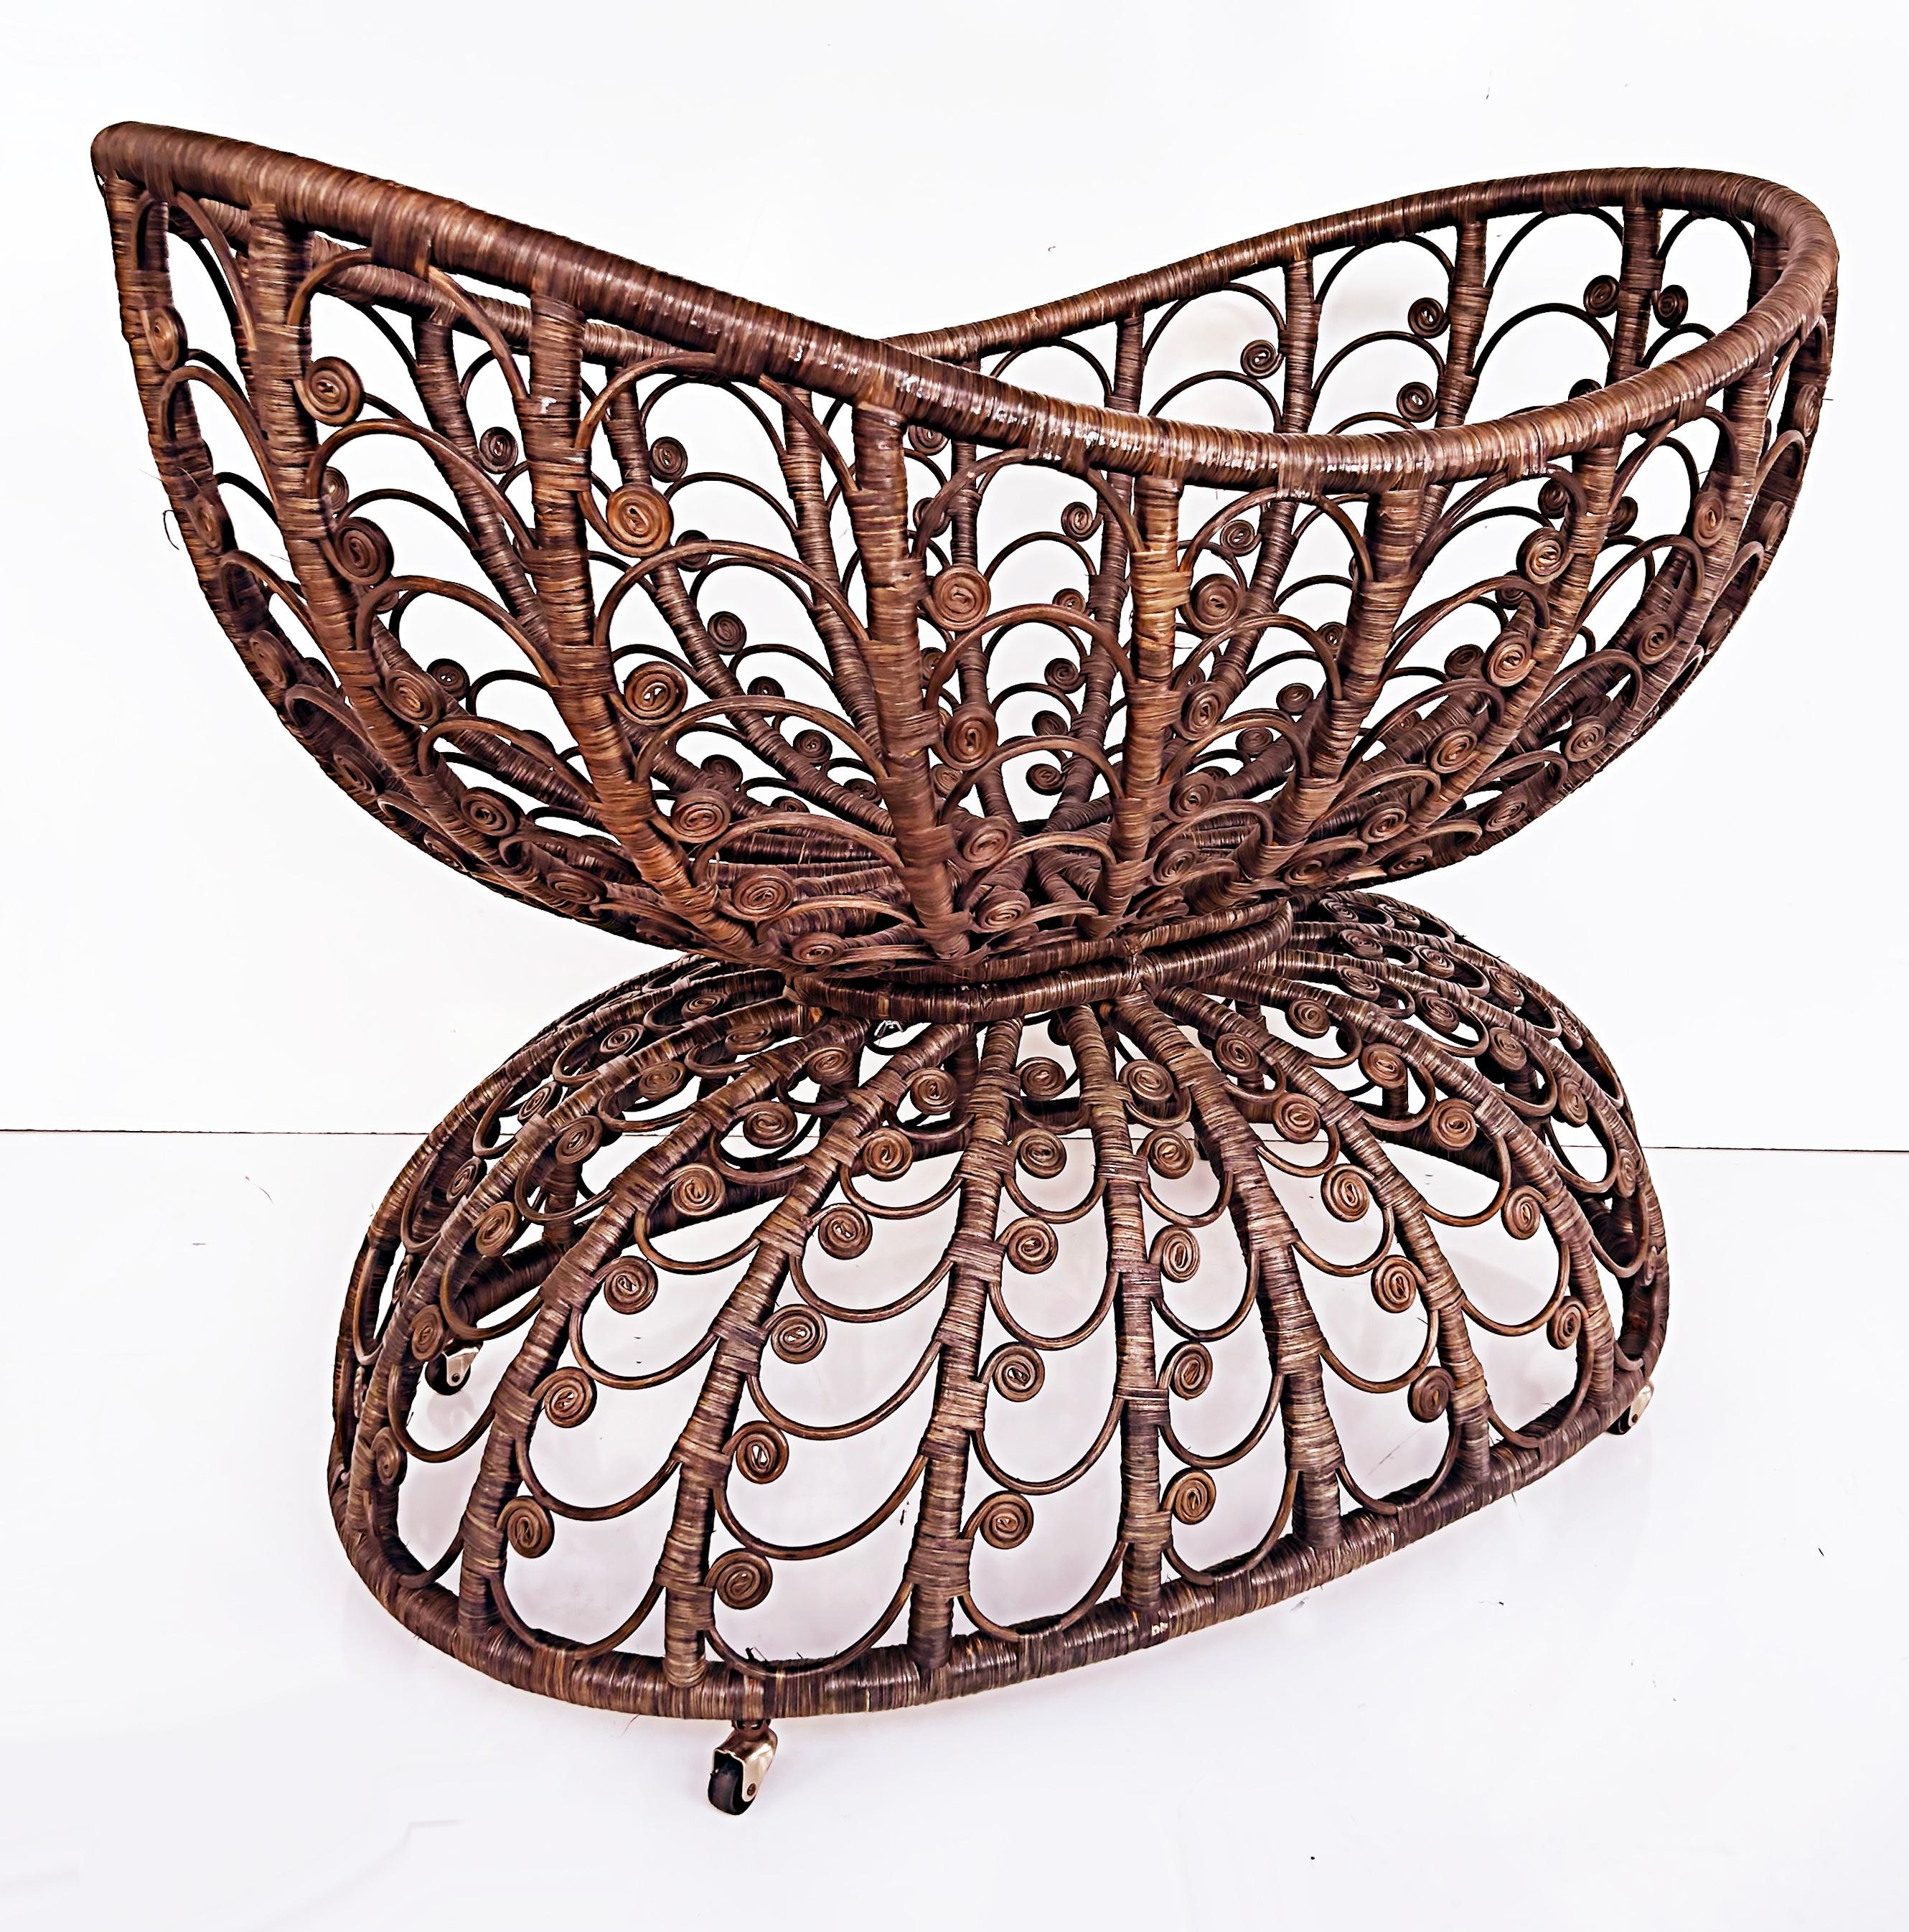 Vintage Scottish Rattan Bassinet, Early-Mid 20th Century

Offered for sale is a vintage early to mid-20th century woven Scottish rattan bassinet that rolls on casters. The bassinet has a rounded form base and cradles the baby with higher ends. The